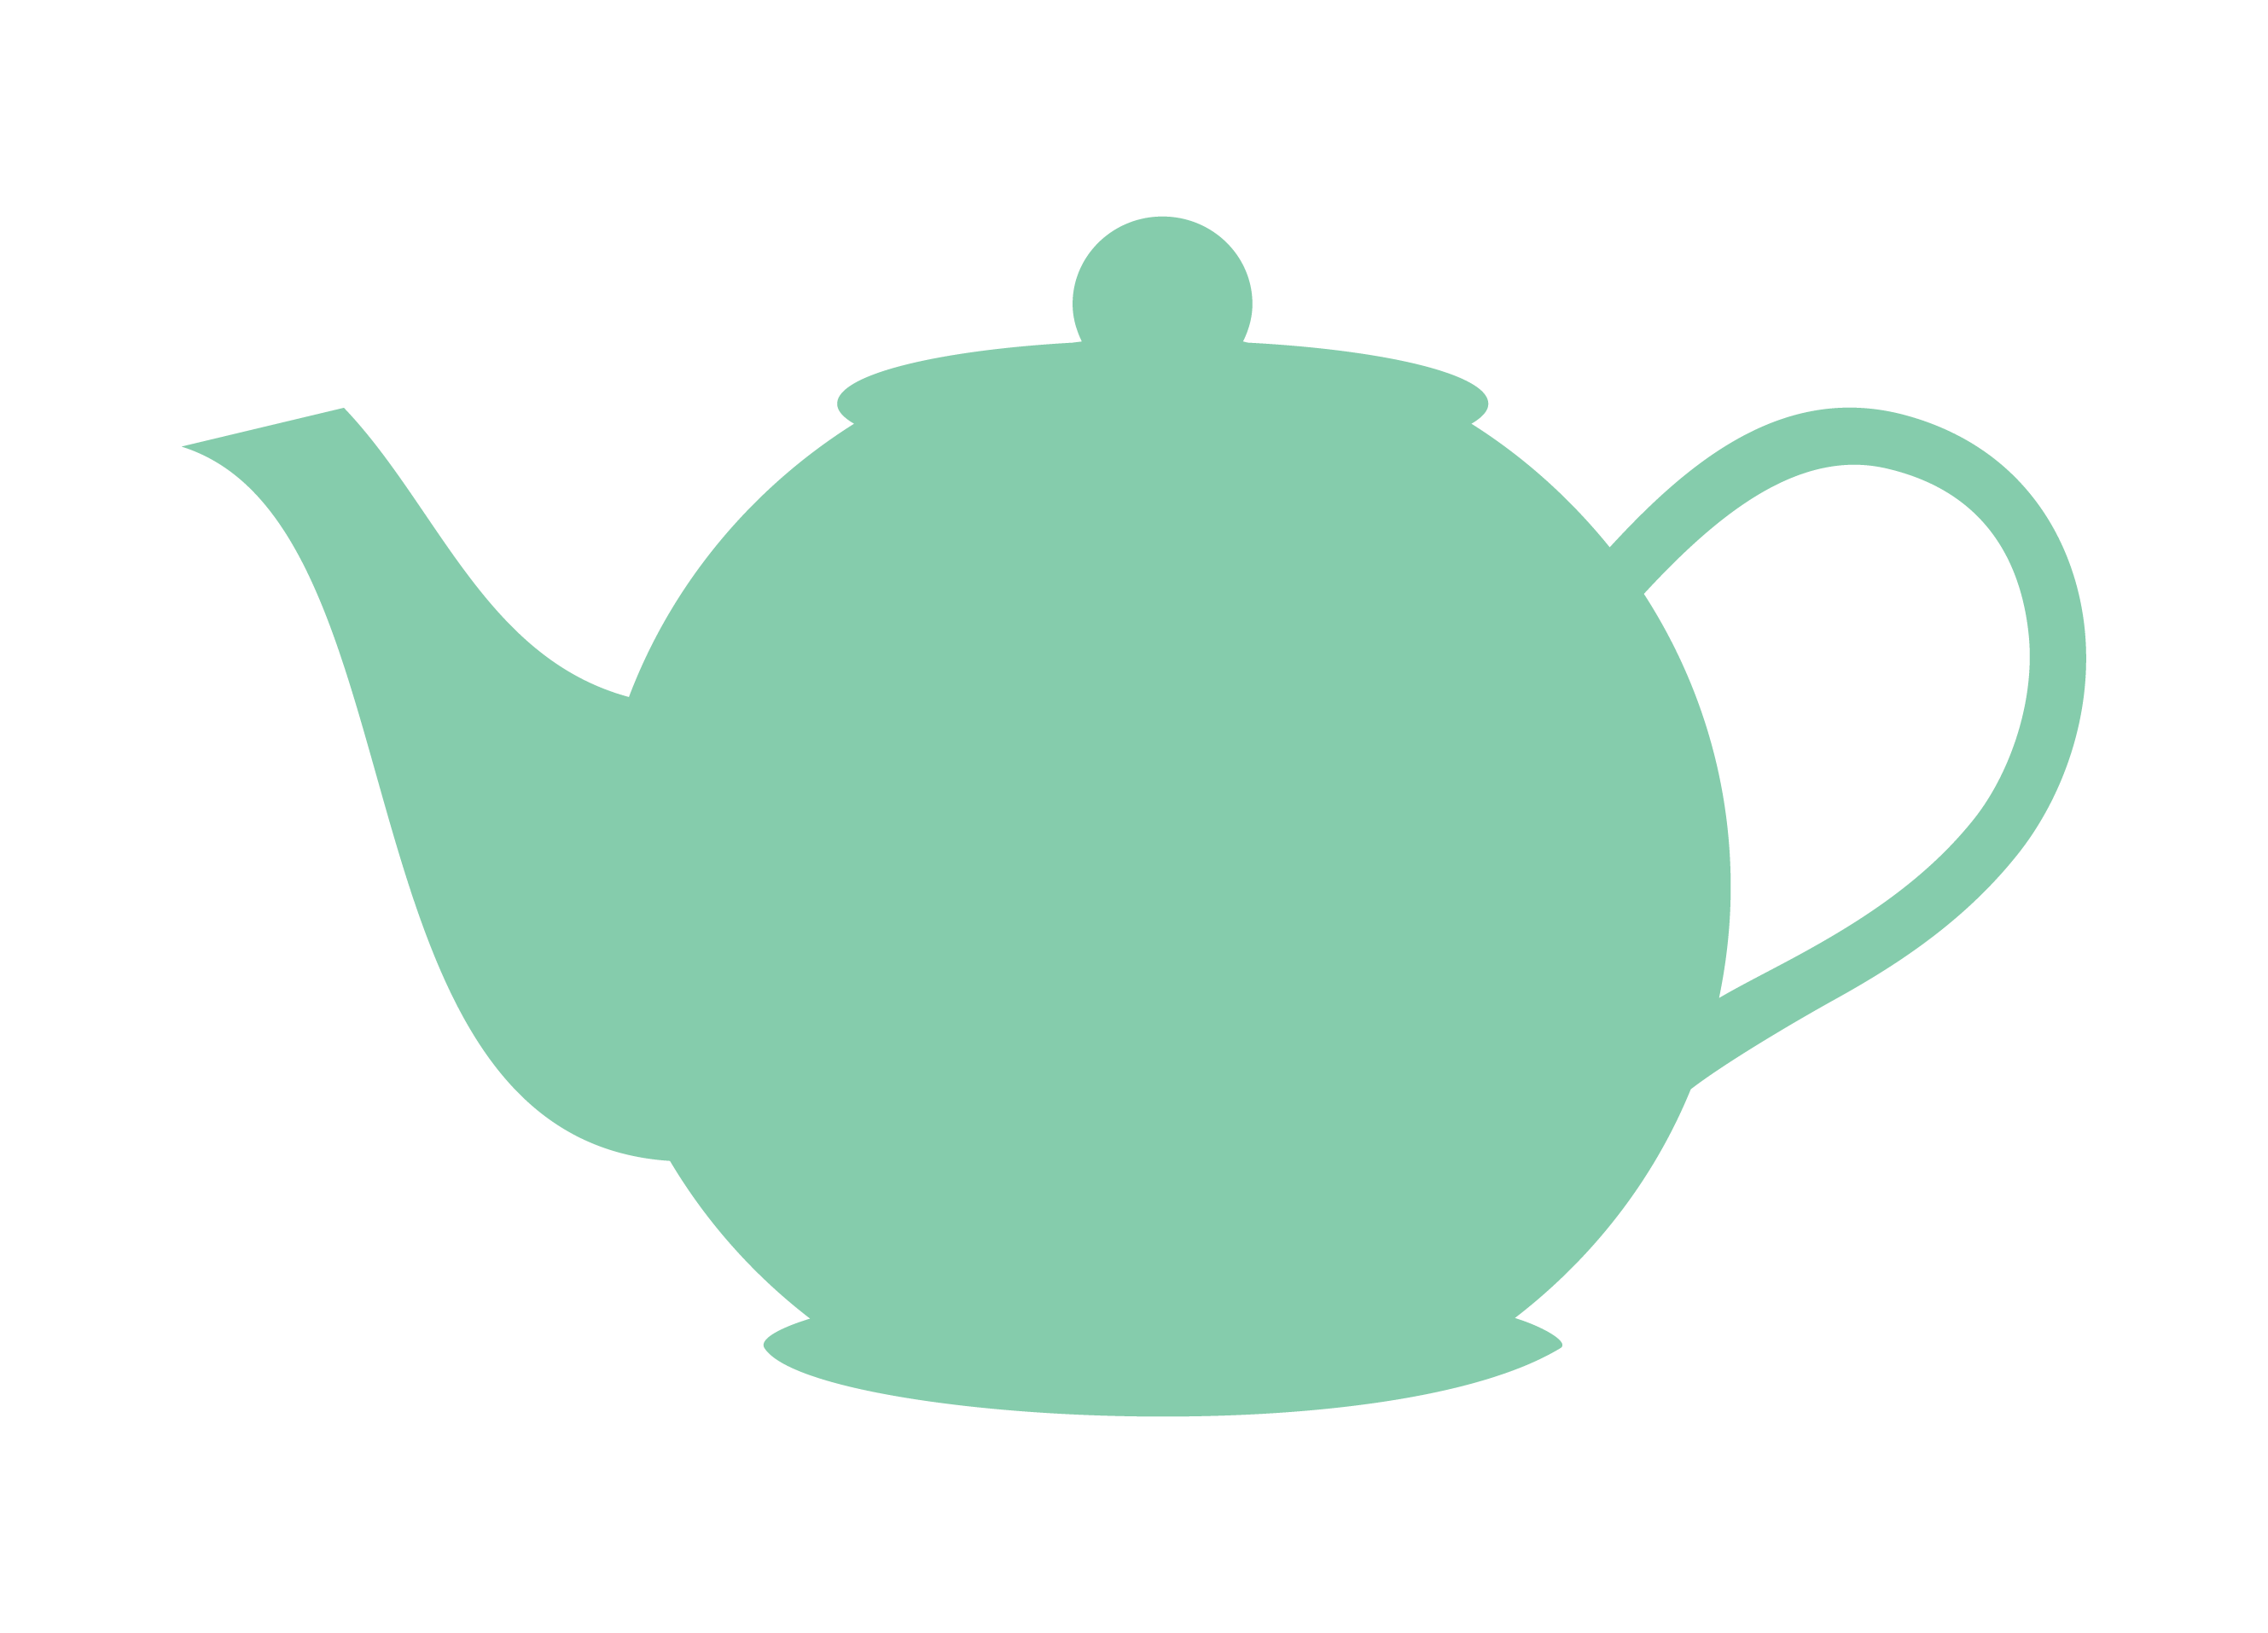 ... Teapot with pattern - Chi